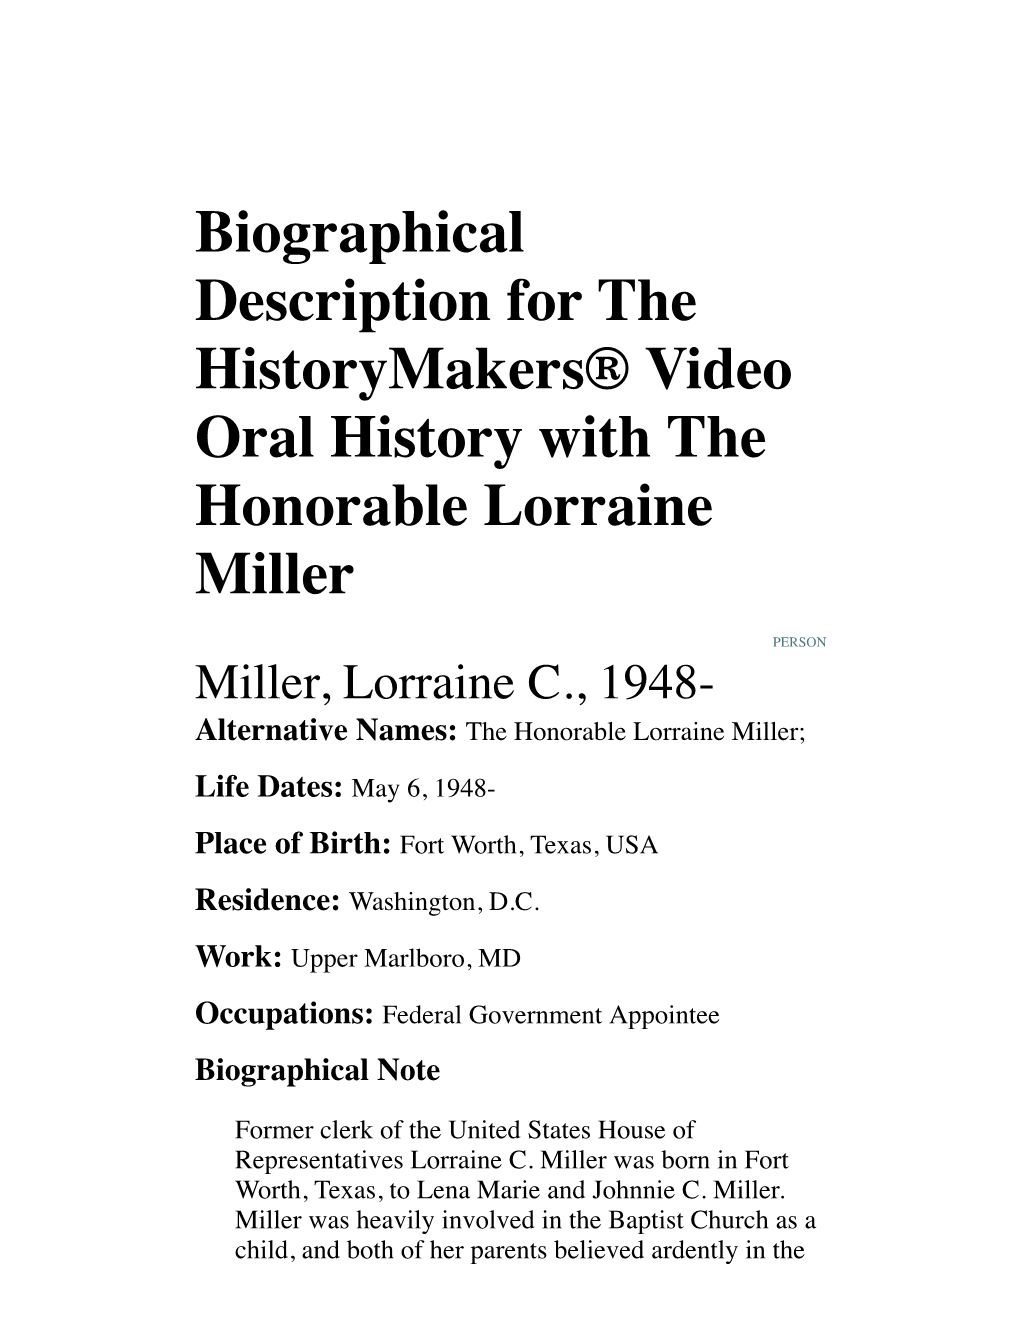 Biographical Description for the Historymakers® Video Oral History with the Honorable Lorraine Miller